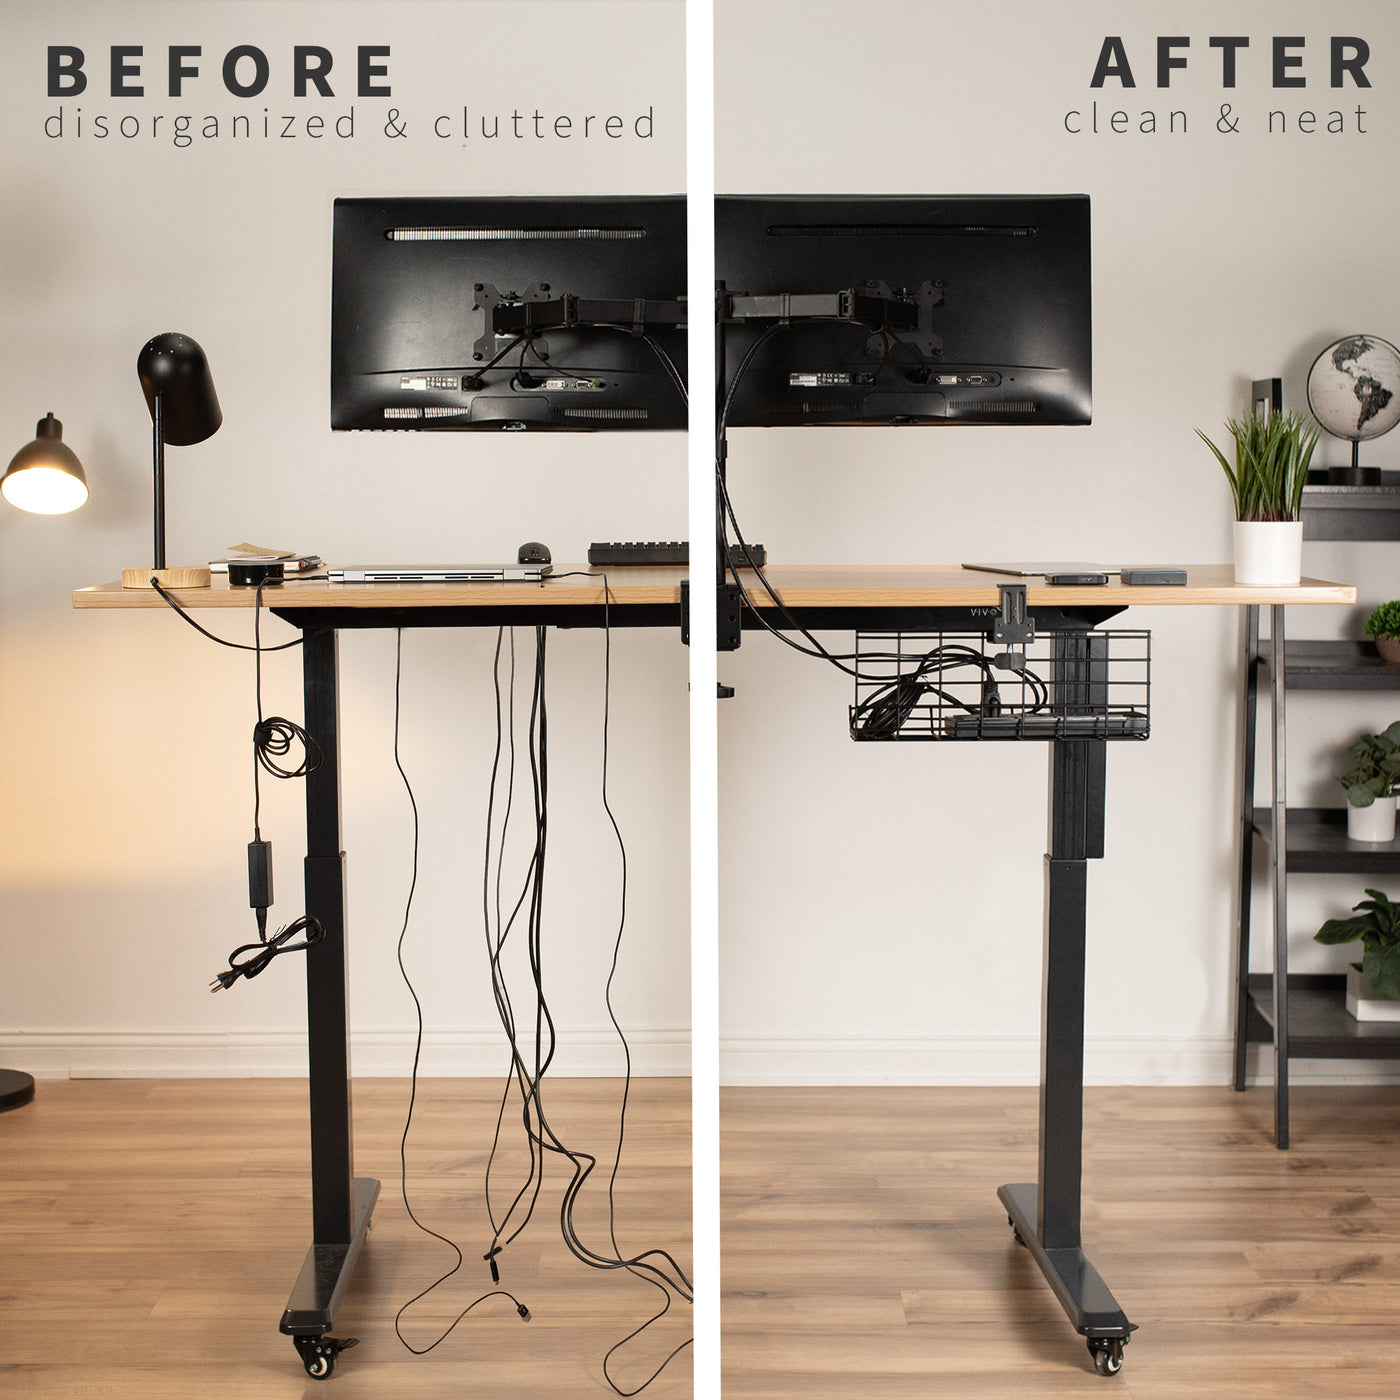 Clamp-on Cable Management Racks – VIVO - desk solutions, screen mounting,  and more